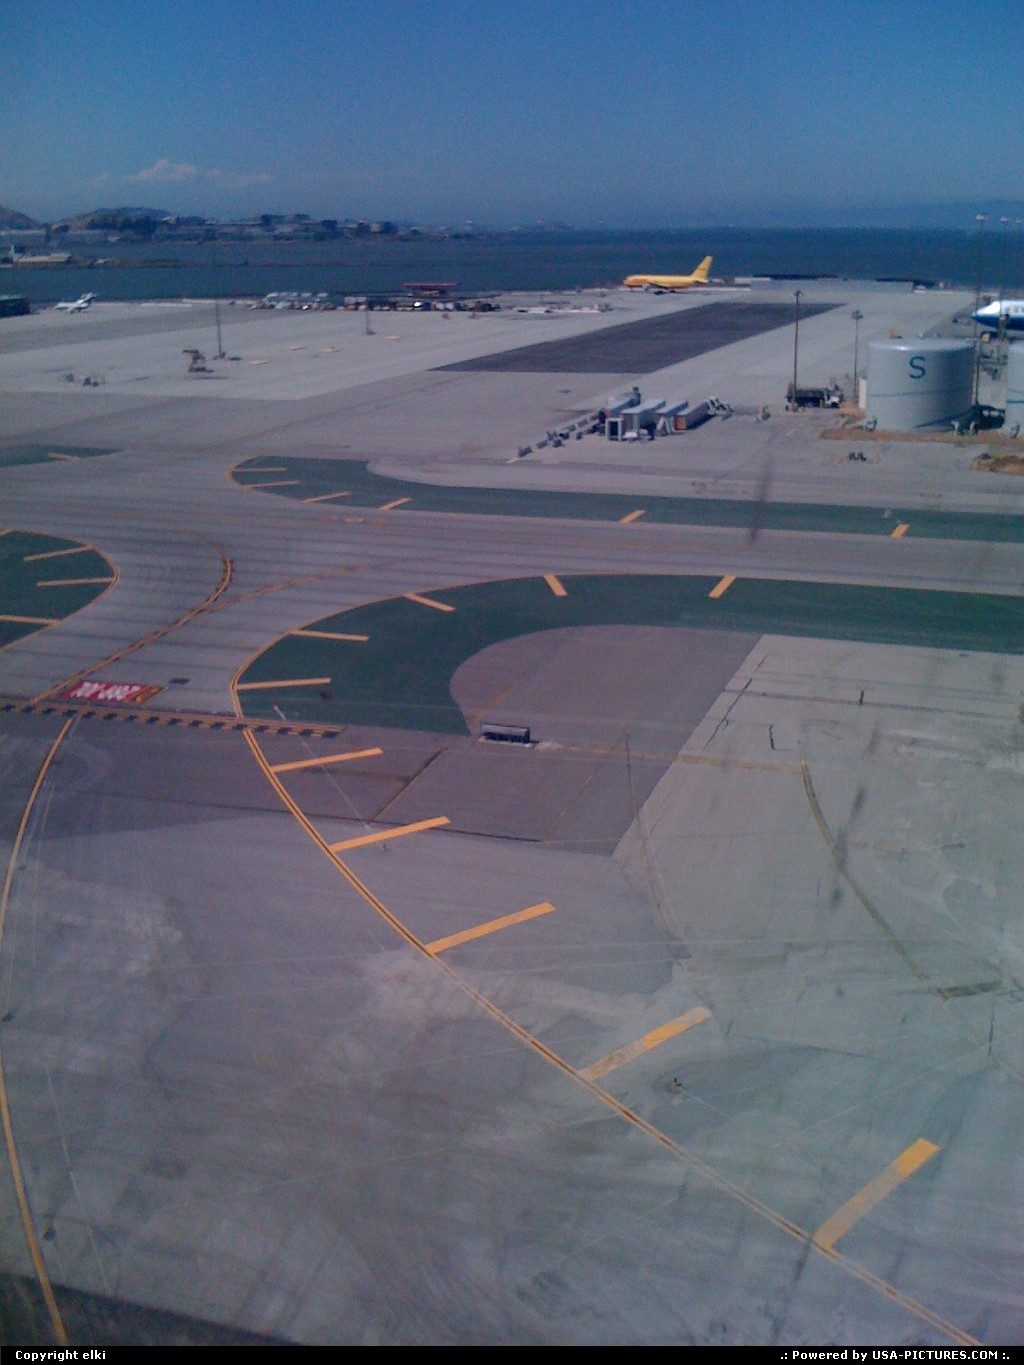 Picture by elki: San Francisco California   san francisco aiport